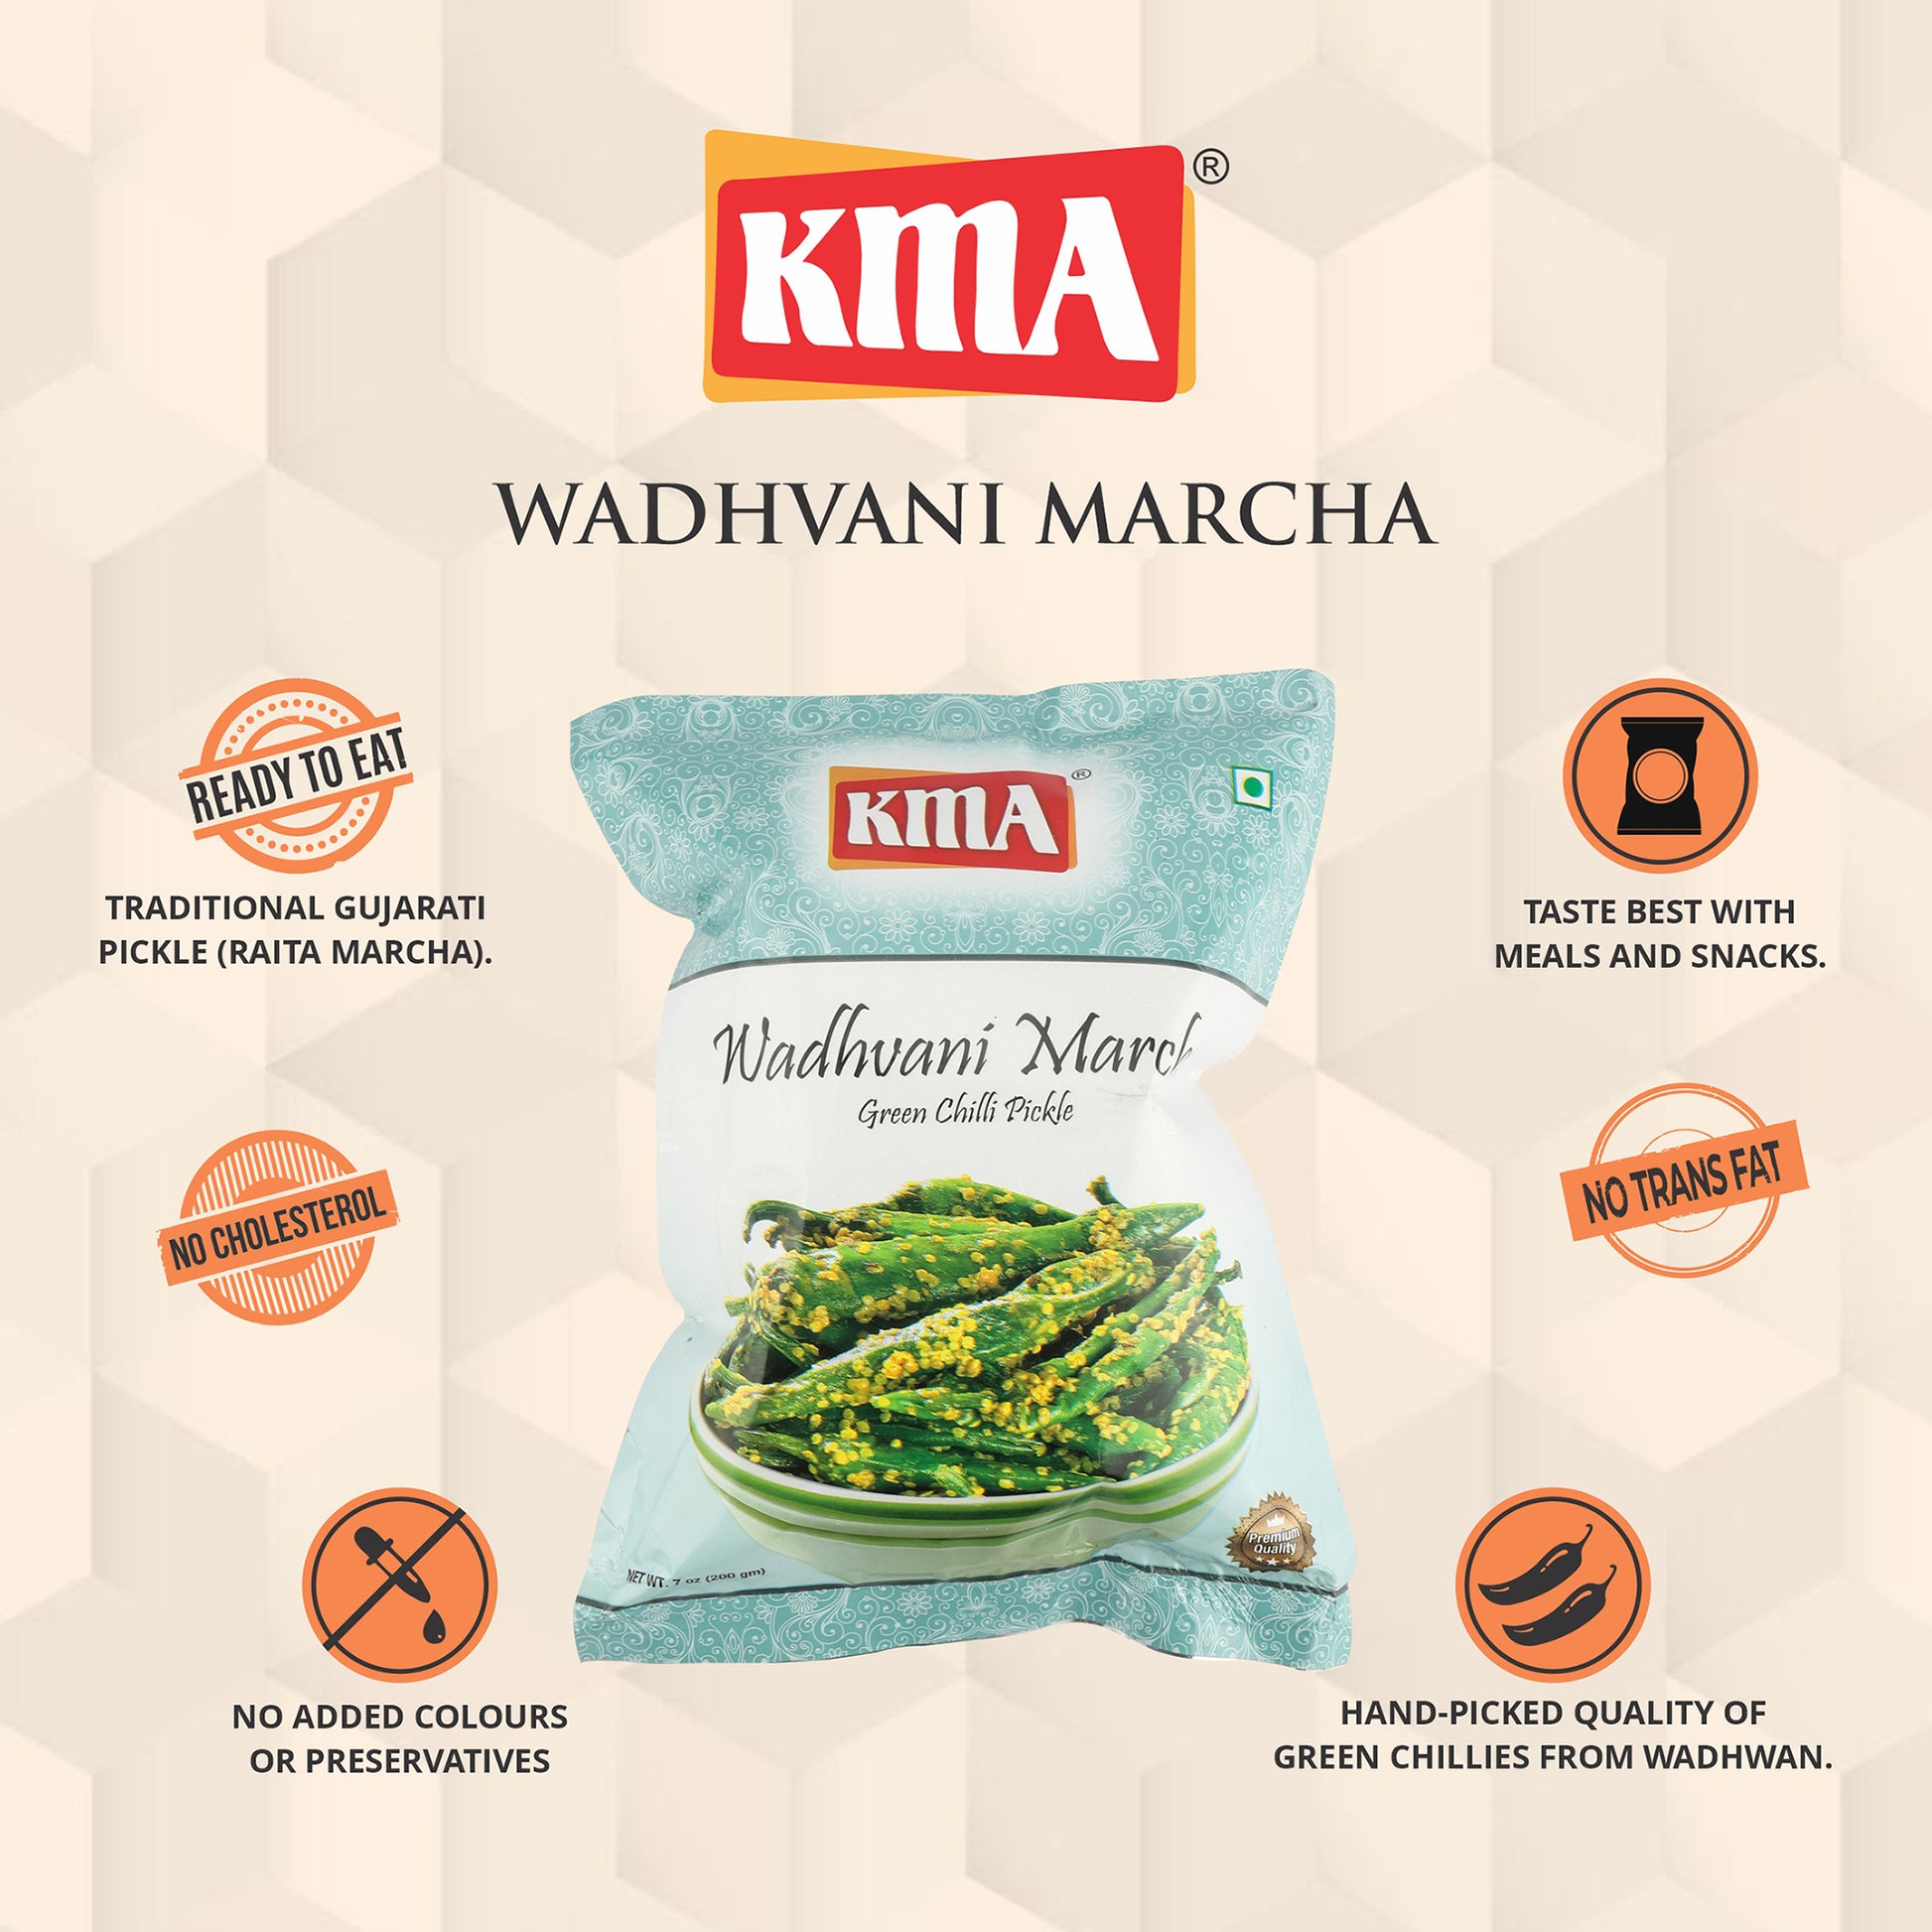 KMA Homemade Wadhwani Marcha Pickle | 3 Packs Combo 200g Each Green Chillies Lambi (Long) Dry Achar Ready to Eat Wadhvani 600g (Pack of x each) - Yellow Mustard Stuffed Chilli Pickles , Authentic Hari Mirch ka with No Preservatives added Healthy Indian Raita Athana dry green chilli stuffed pouch marwari athana mirichi homemade rajasthani hari mirch achar pickles no-preservatives aachar mirchi achaar chili organic vadhvani bharela marcha